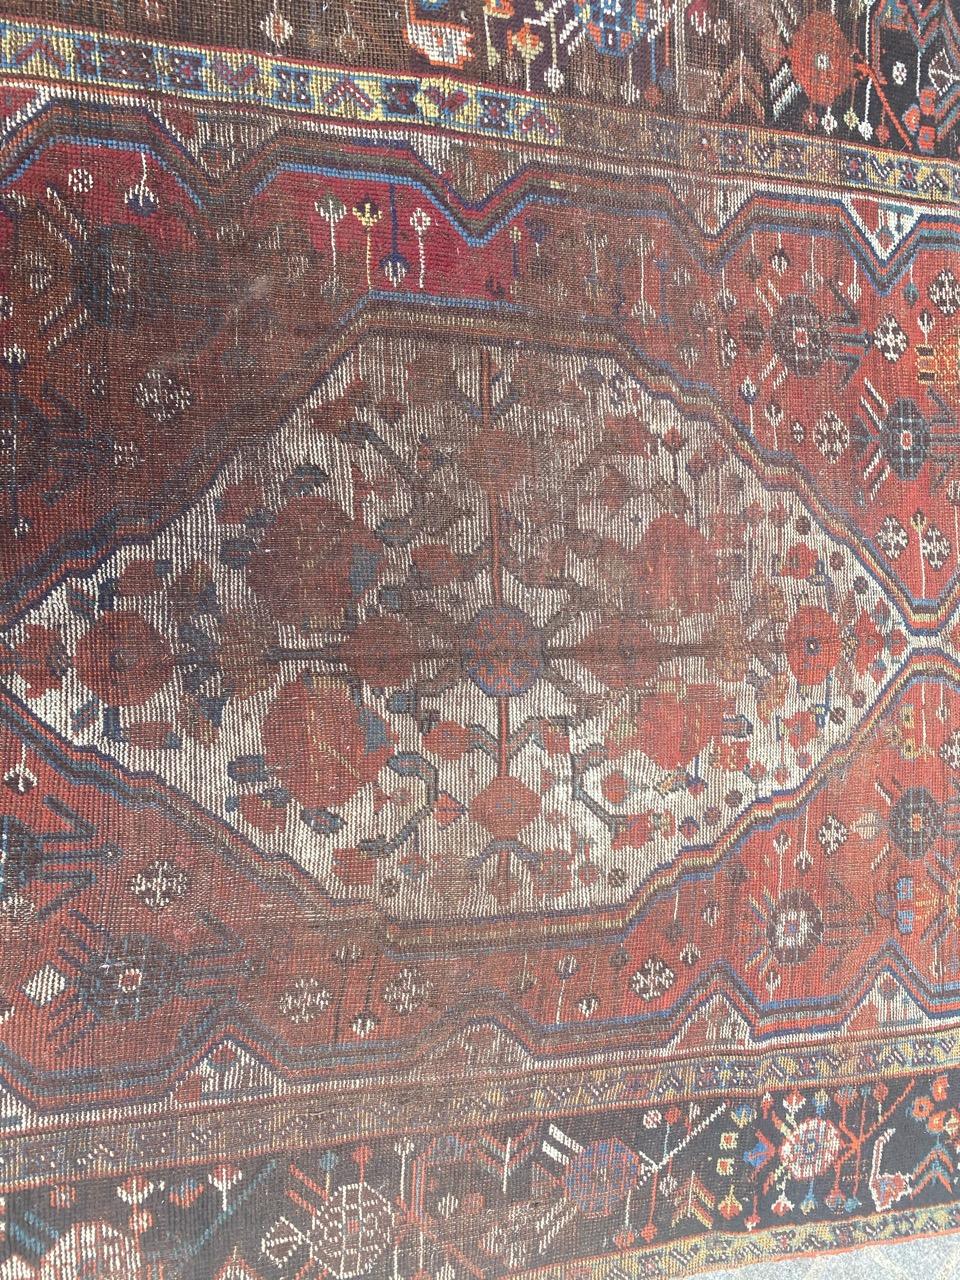 Pretty 19th century fine distressed Shiraz ghashghai rug with beautiful geometrical and tribal design and nice colors, entirely hand knotted with wool velvet on wool foundation.

✨✨✨
